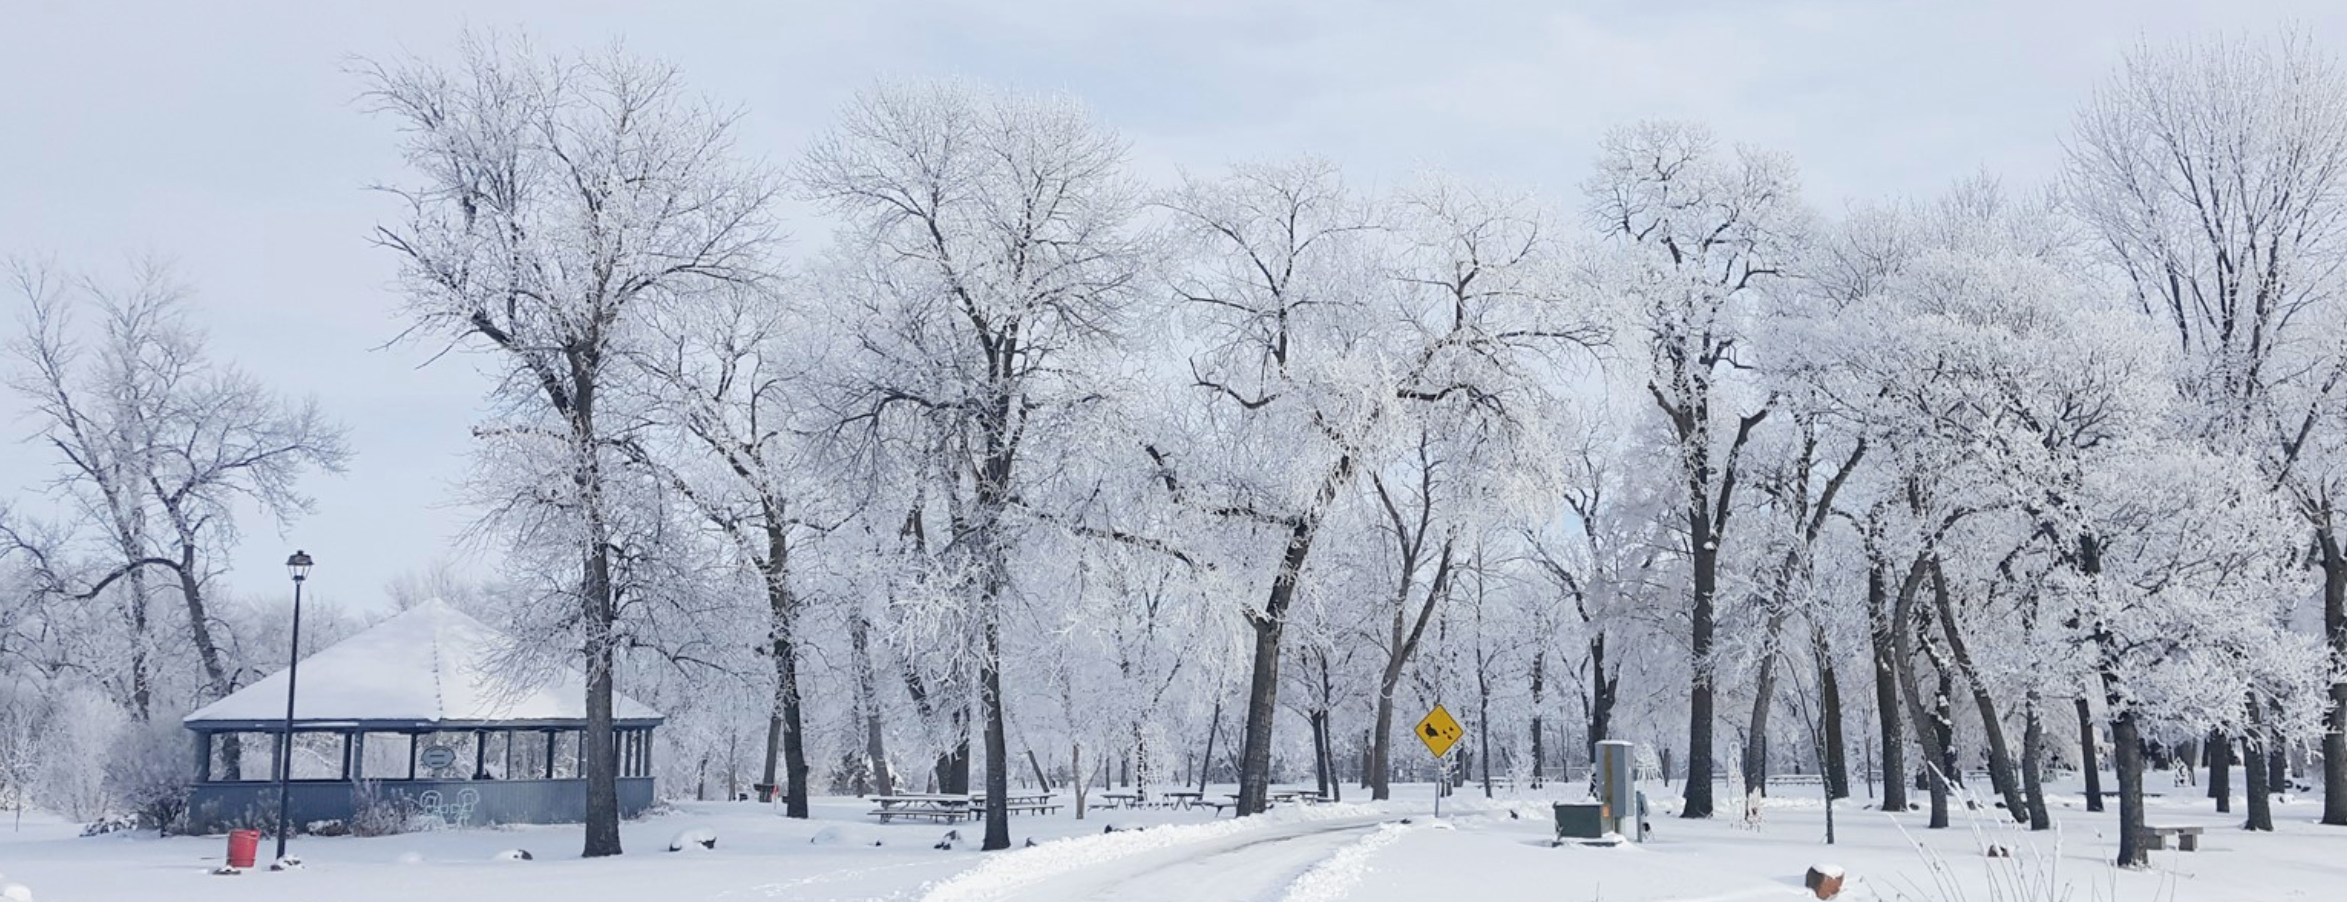 A snowy landscape with several bare trees with frosted limbs. A small blue yurt-like structure is off to the left side, under a lamp post.